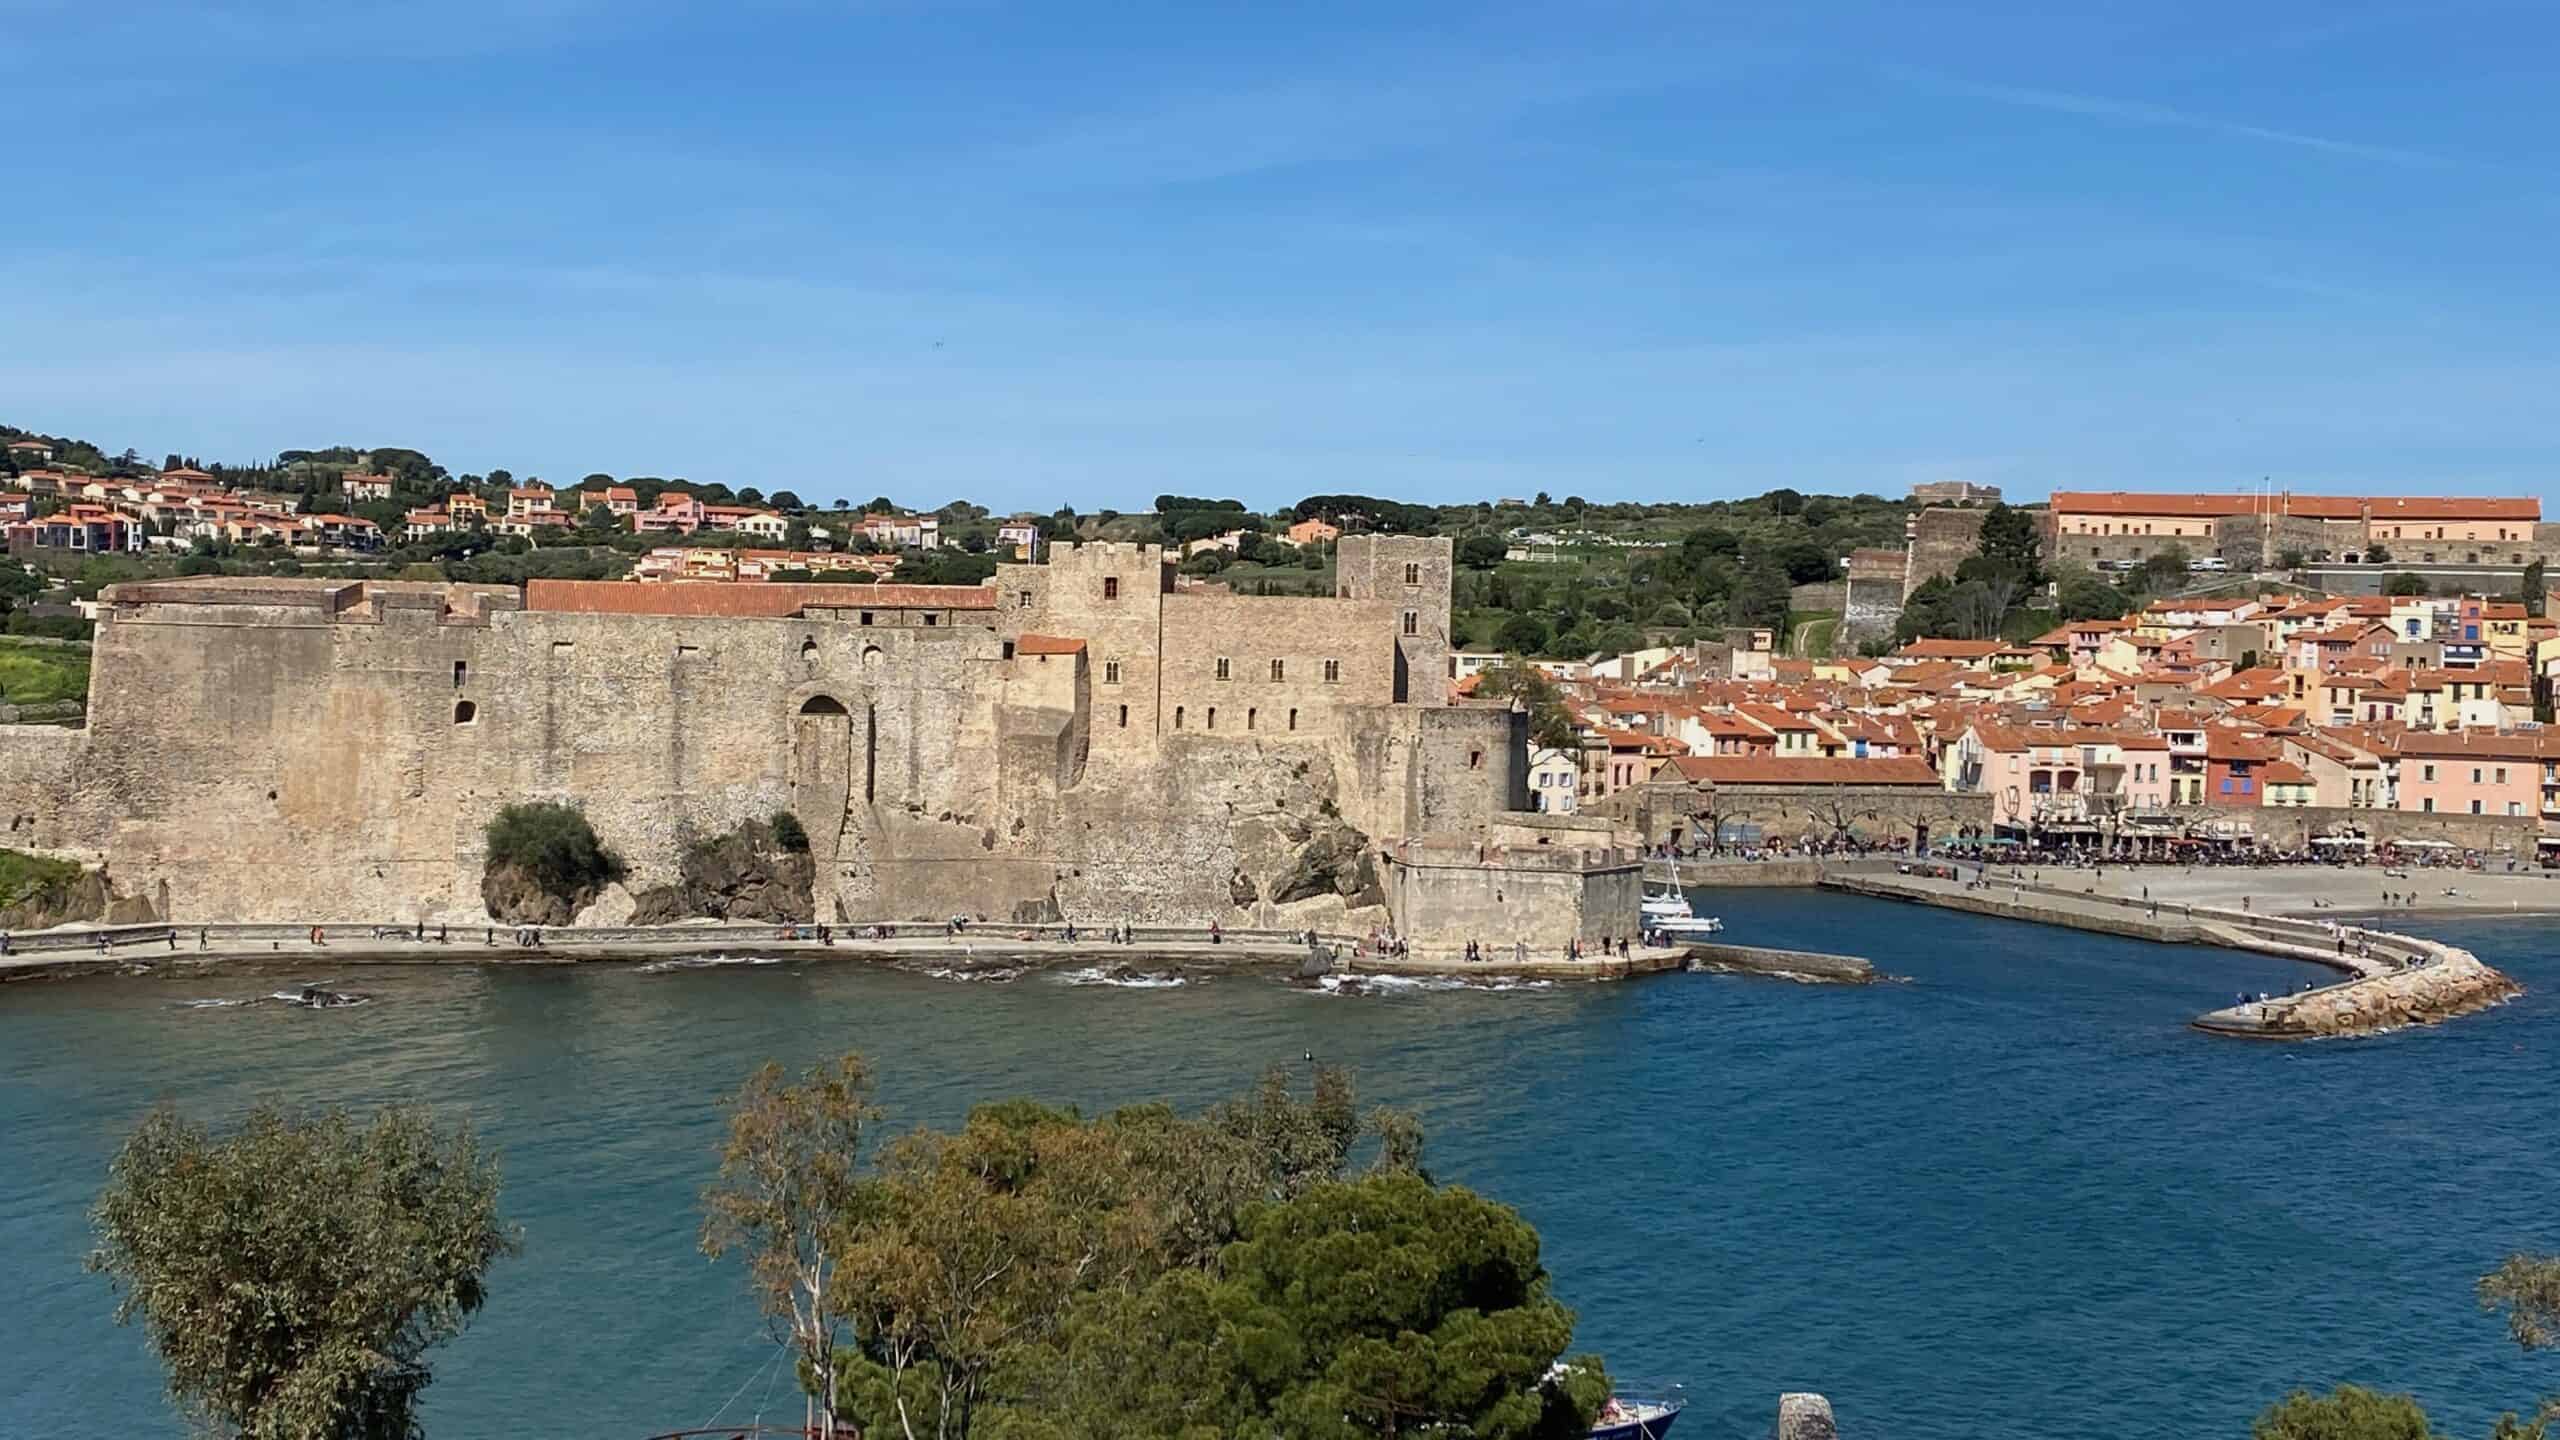 View of the castle in Collioure